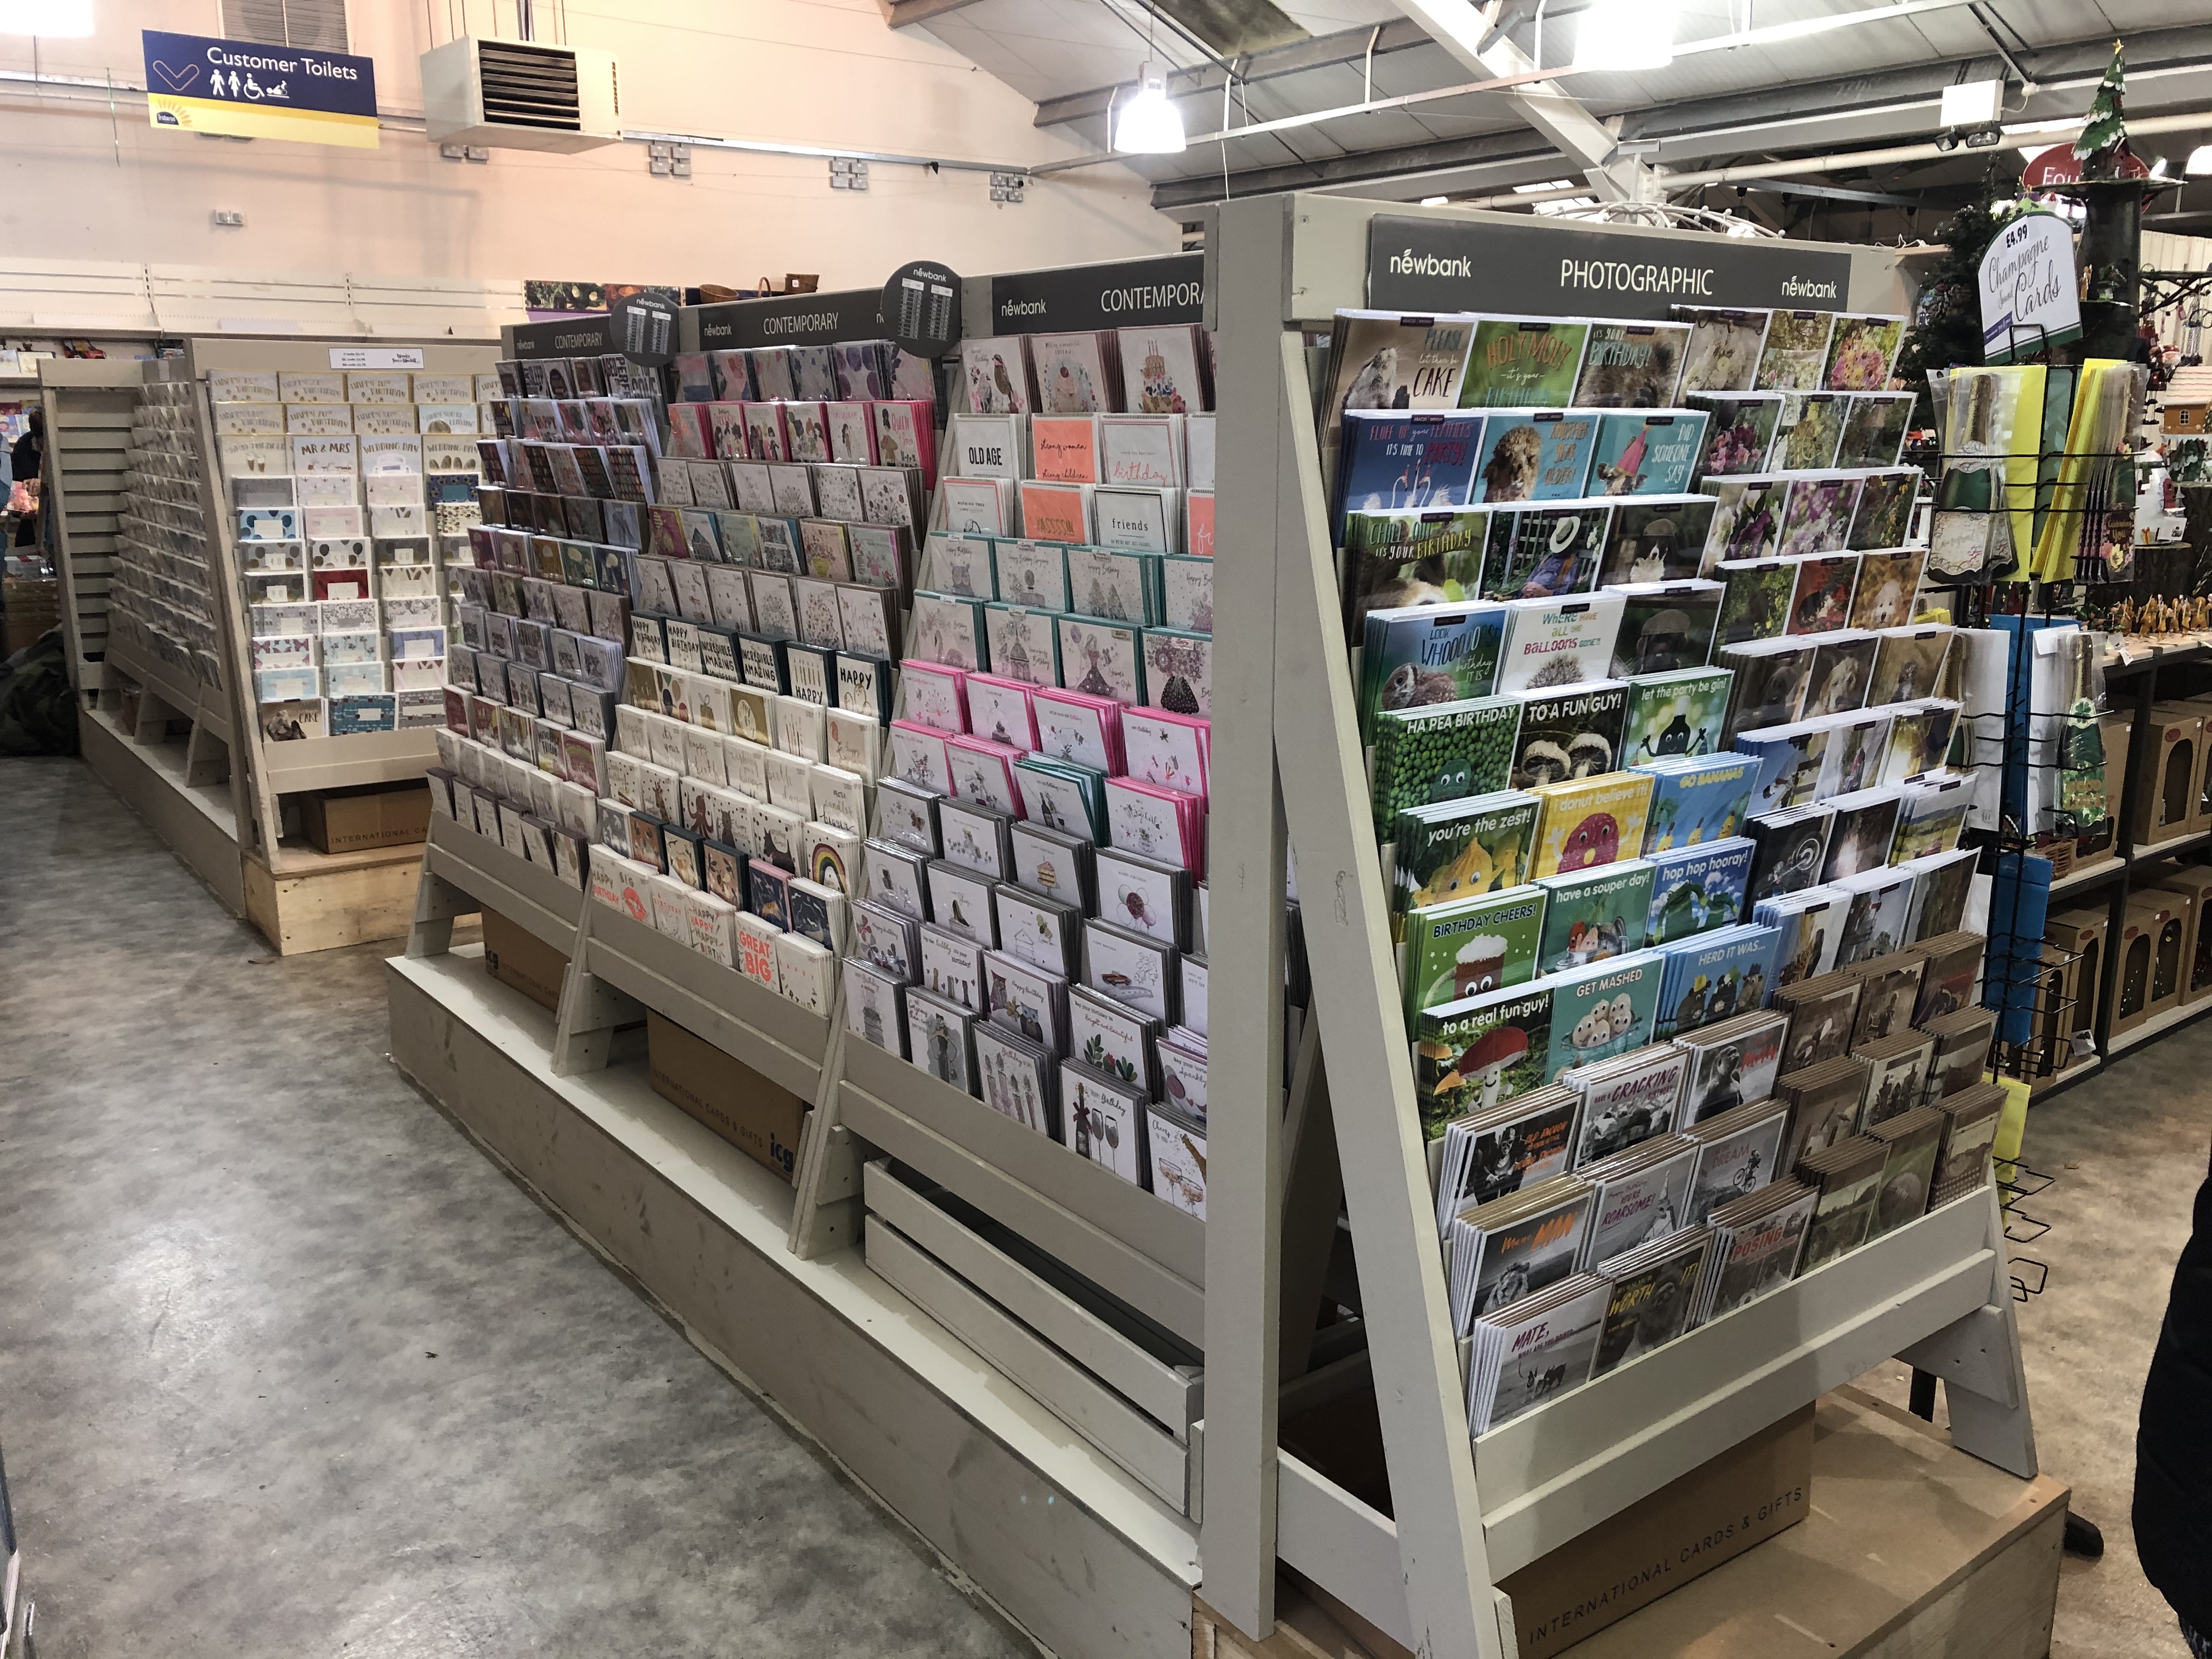 Above: Part of the new greeting card department in Newbank’s Newton-le-Willows garden centre.